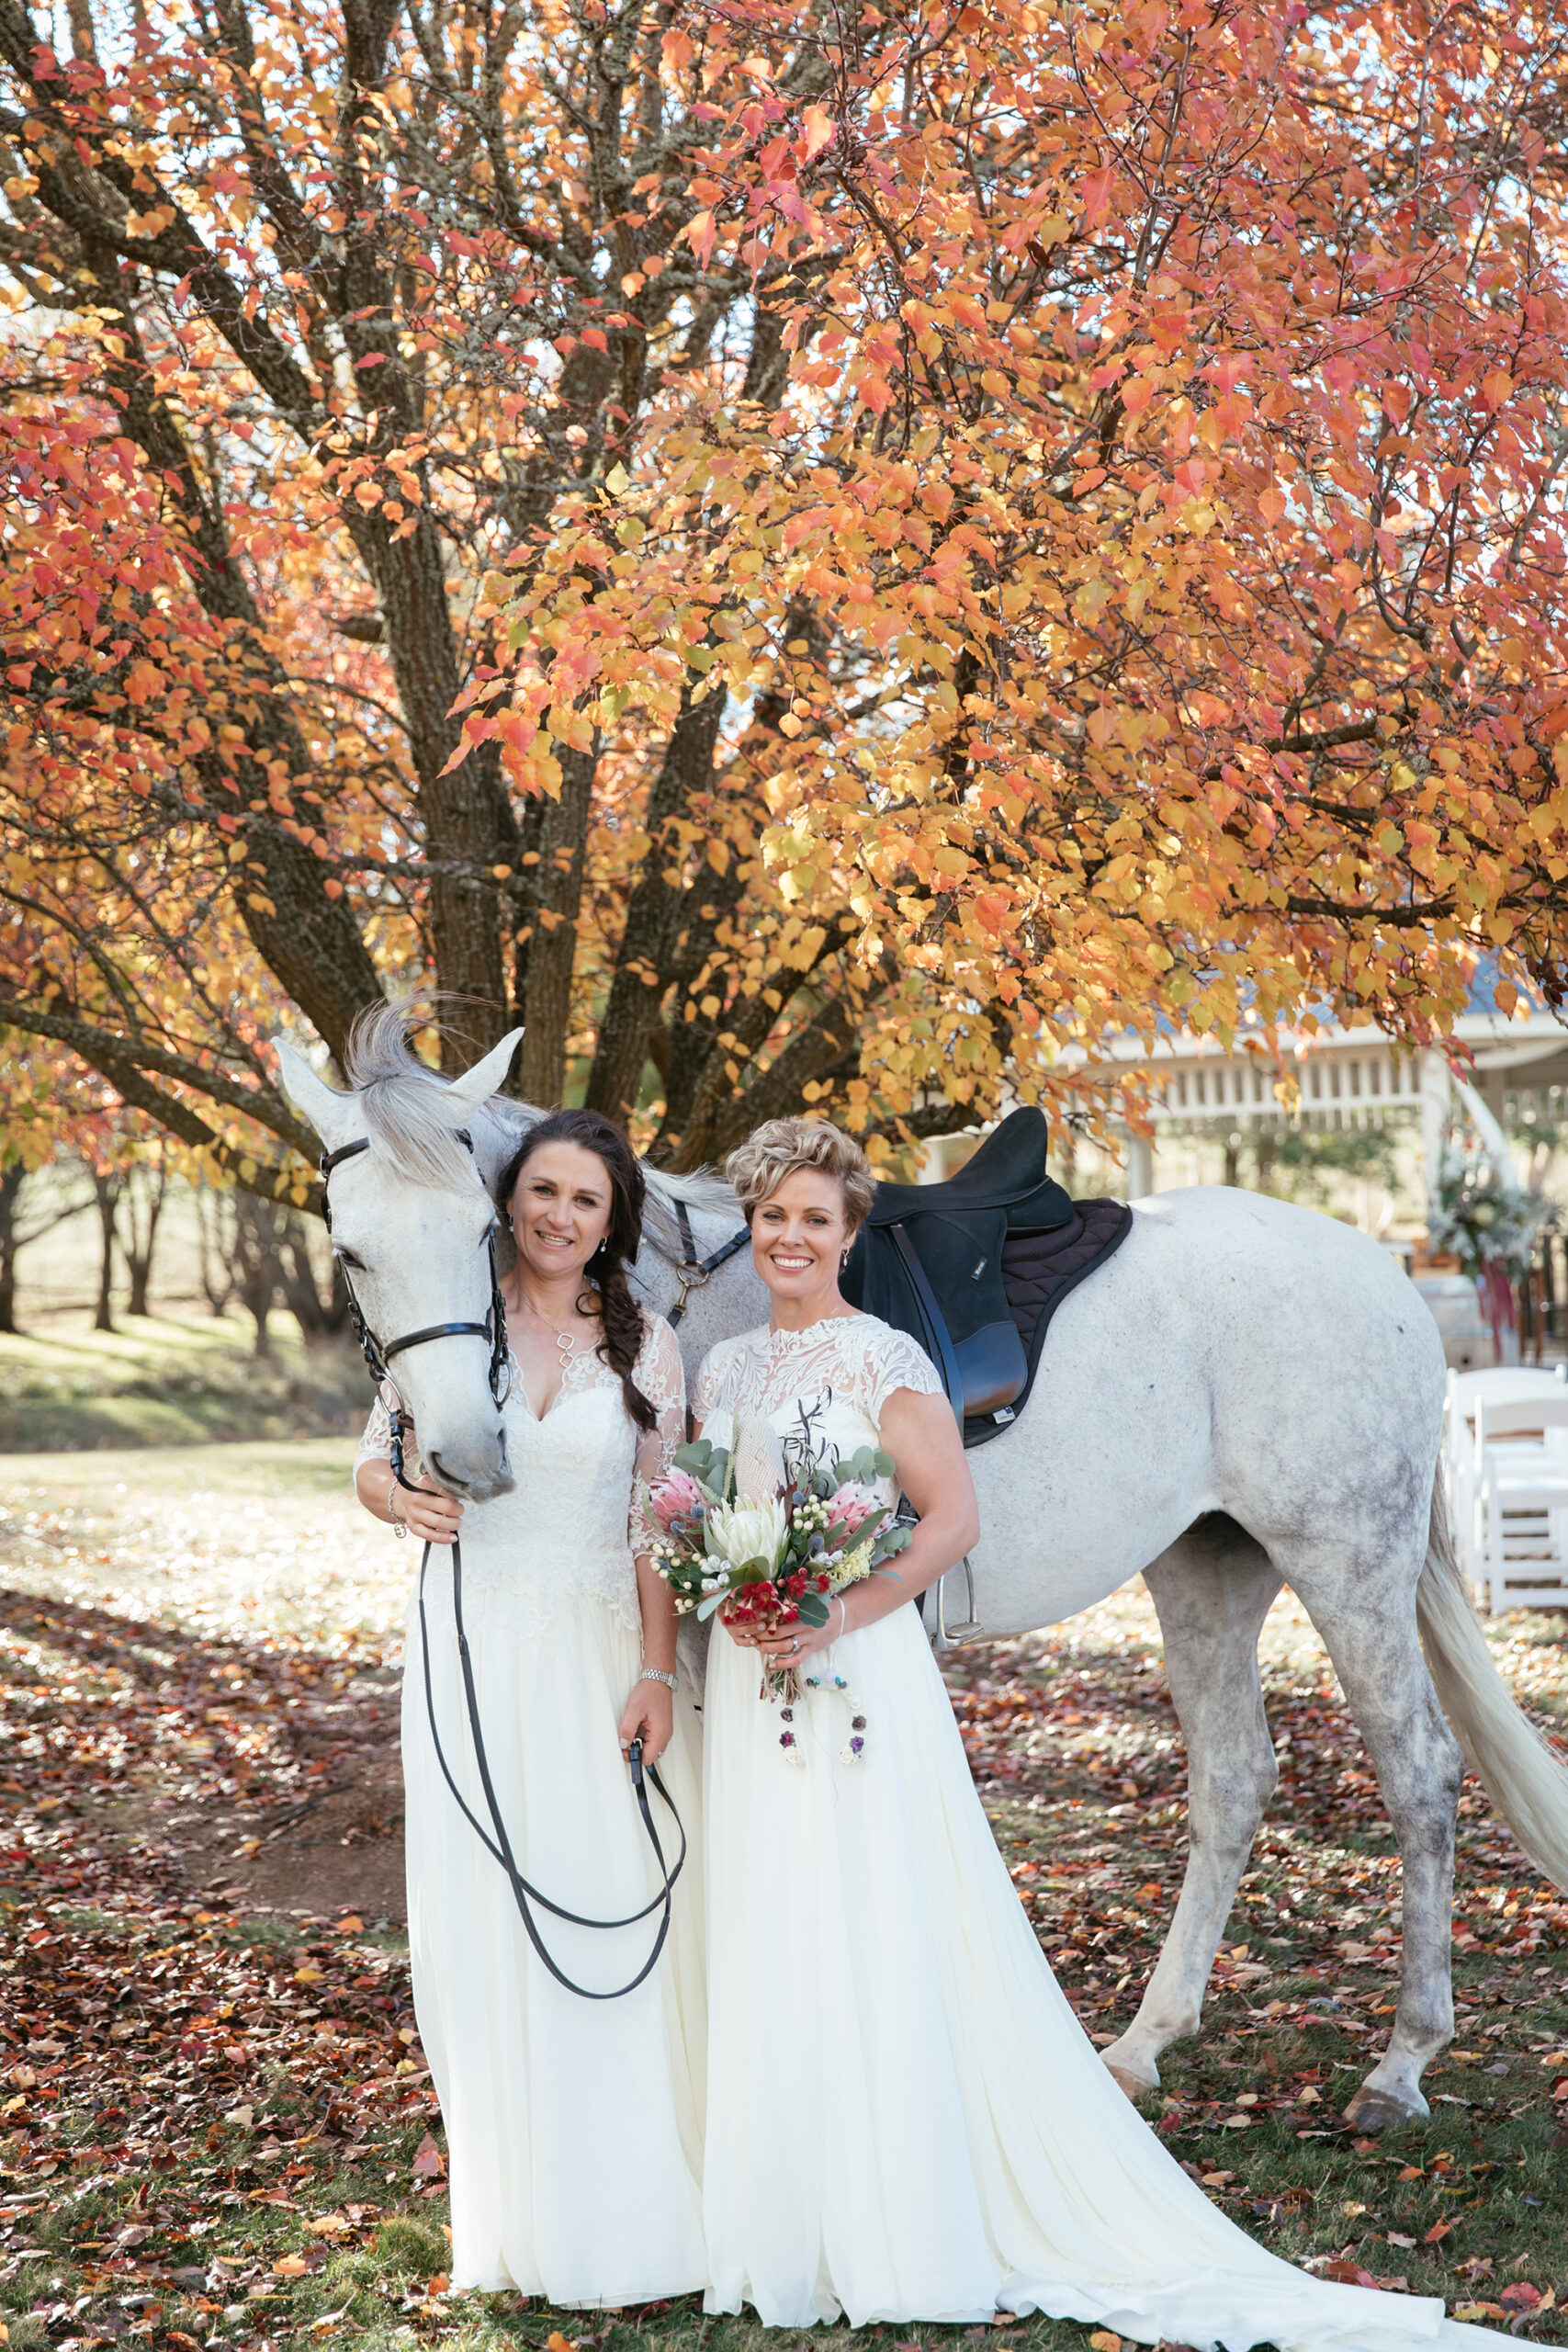 Renee Felicity Classic Country Wedding Pepper Image 025 scaled